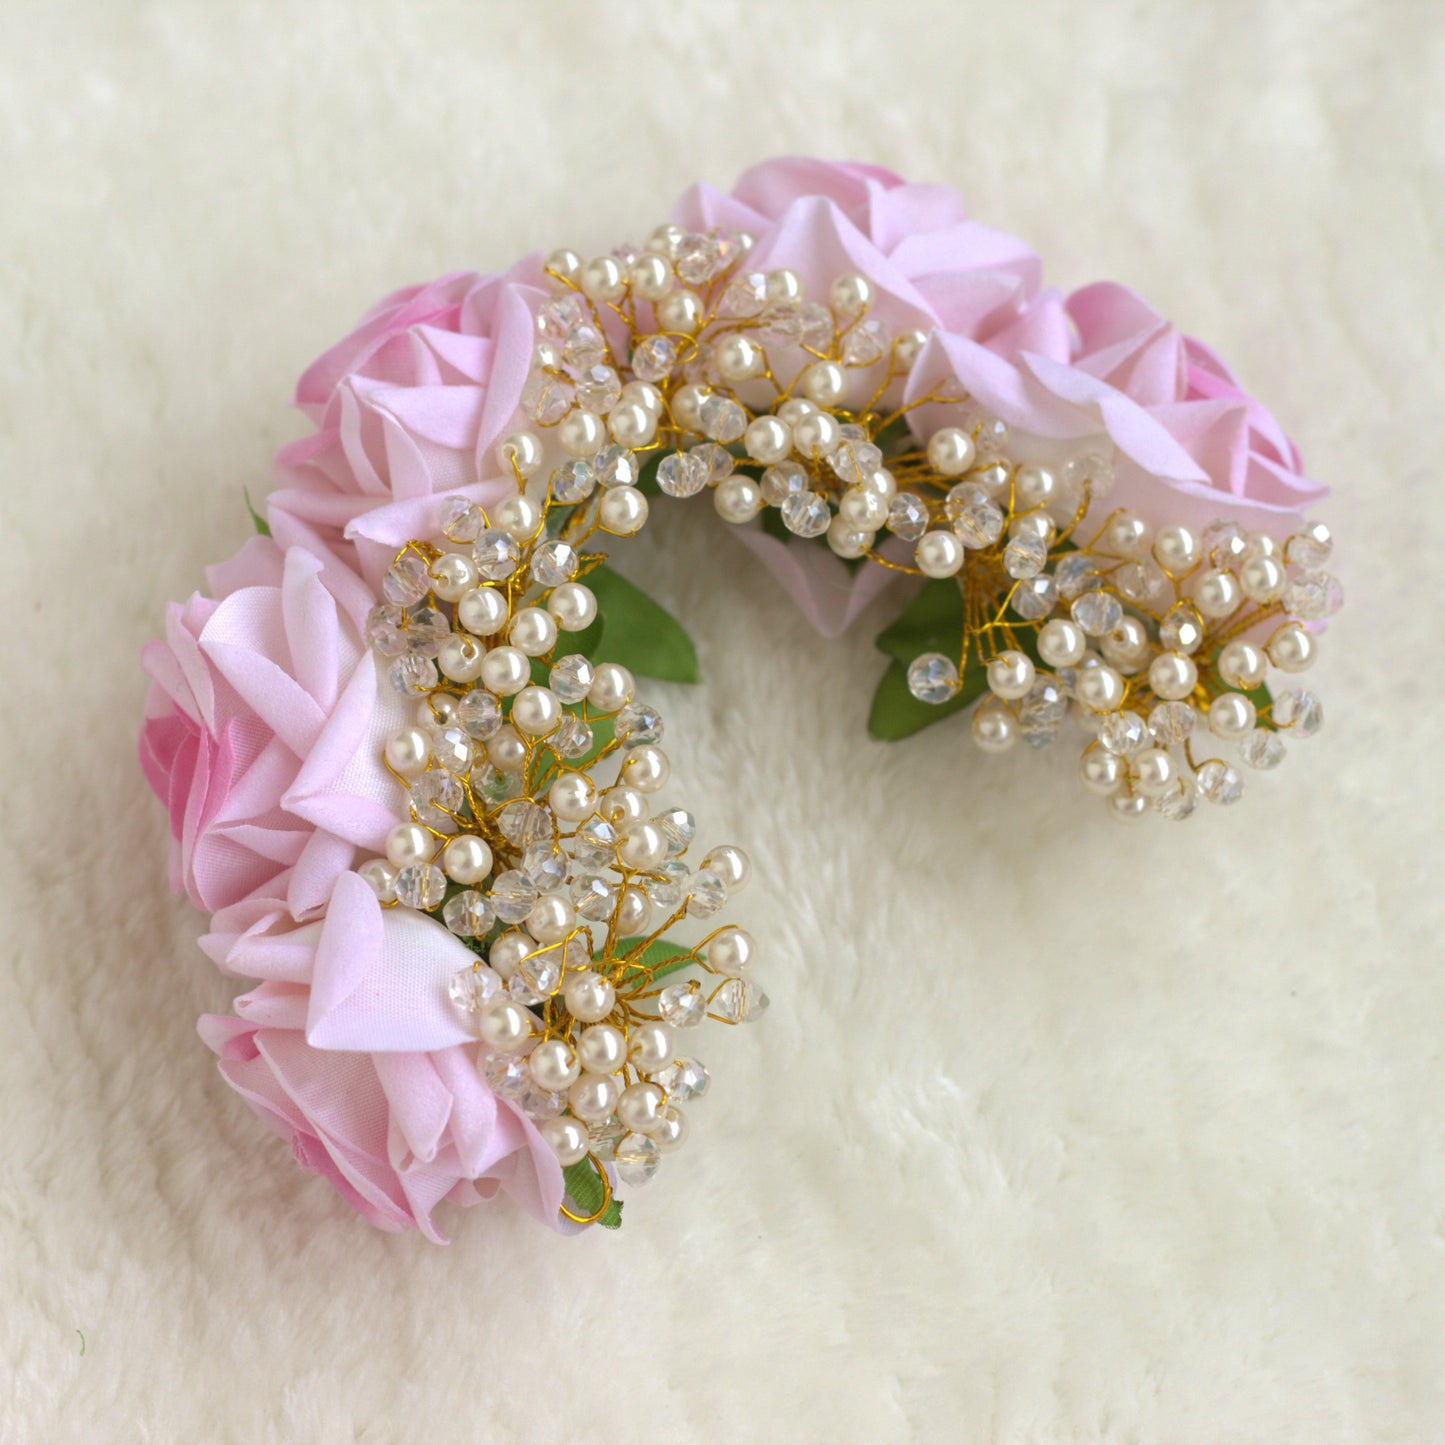 Flexible Real Look Roses with Pearls & Crystals Artificial Hair Bun Flower Accessory